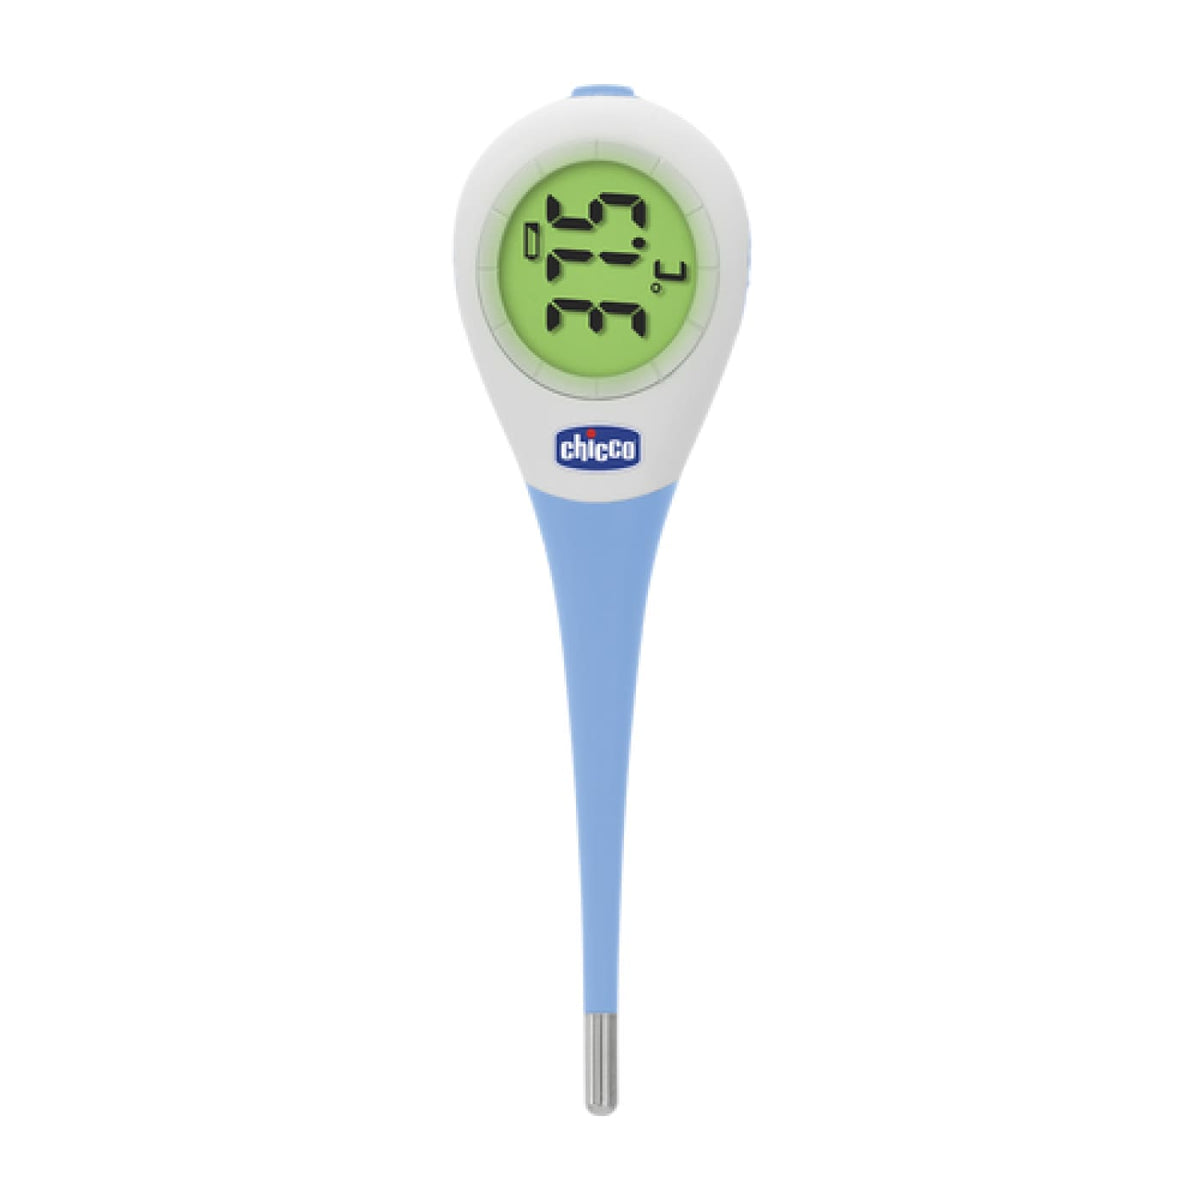 Chicco Flex Night Digital Thermometer - HEALTH &amp; HOME SAFETY - THERMOMETERS/MEDICINAL